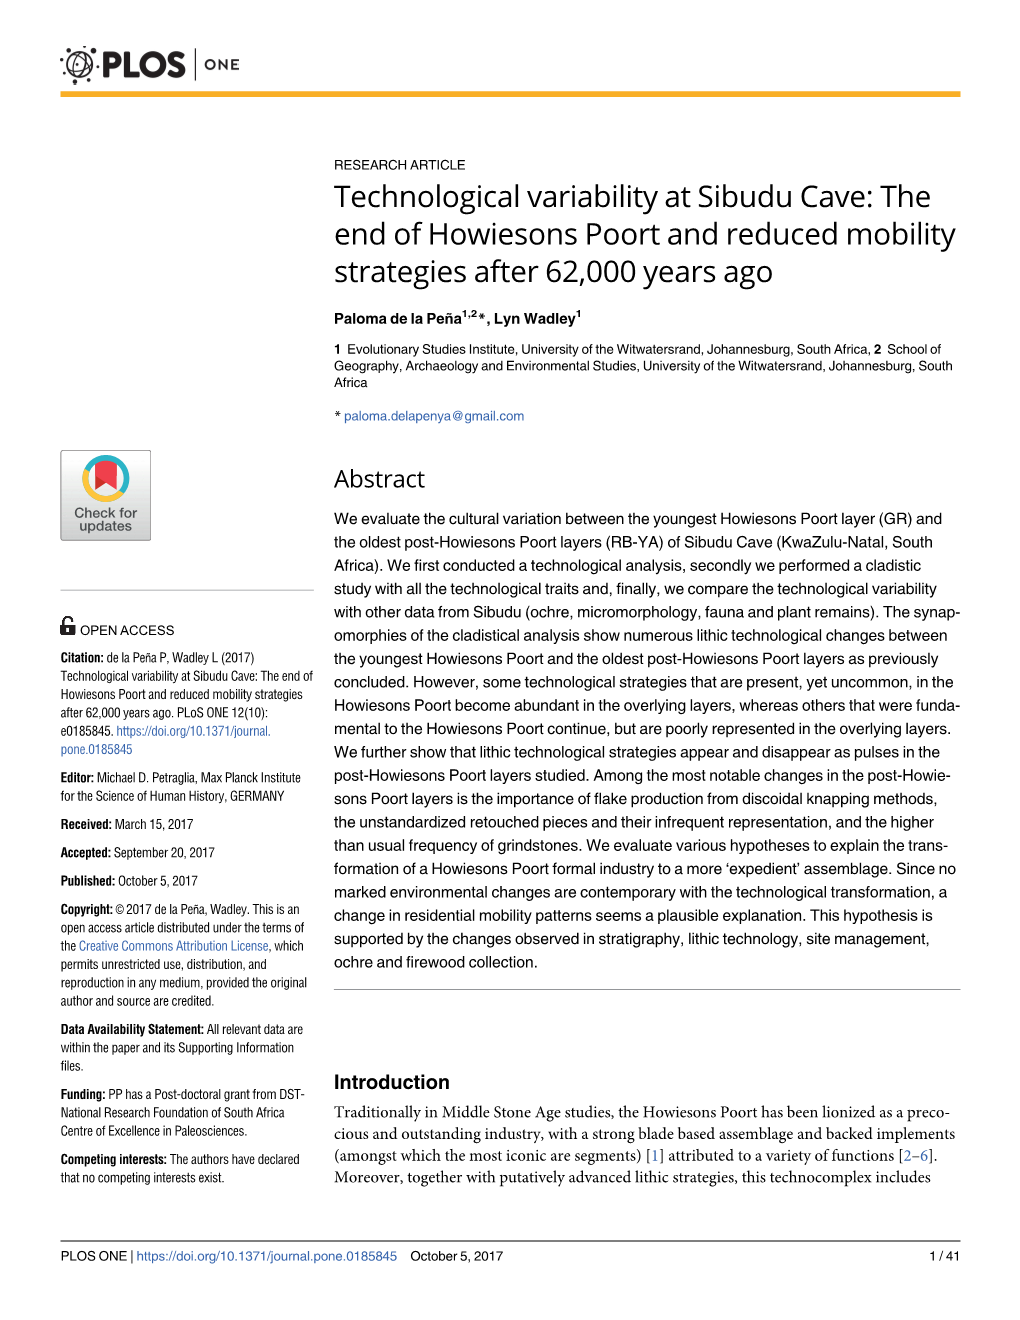 Technological Variability at Sibudu Cave: the End of Howiesons Poort and Reduced Mobility Strategies After 62,000 Years Ago